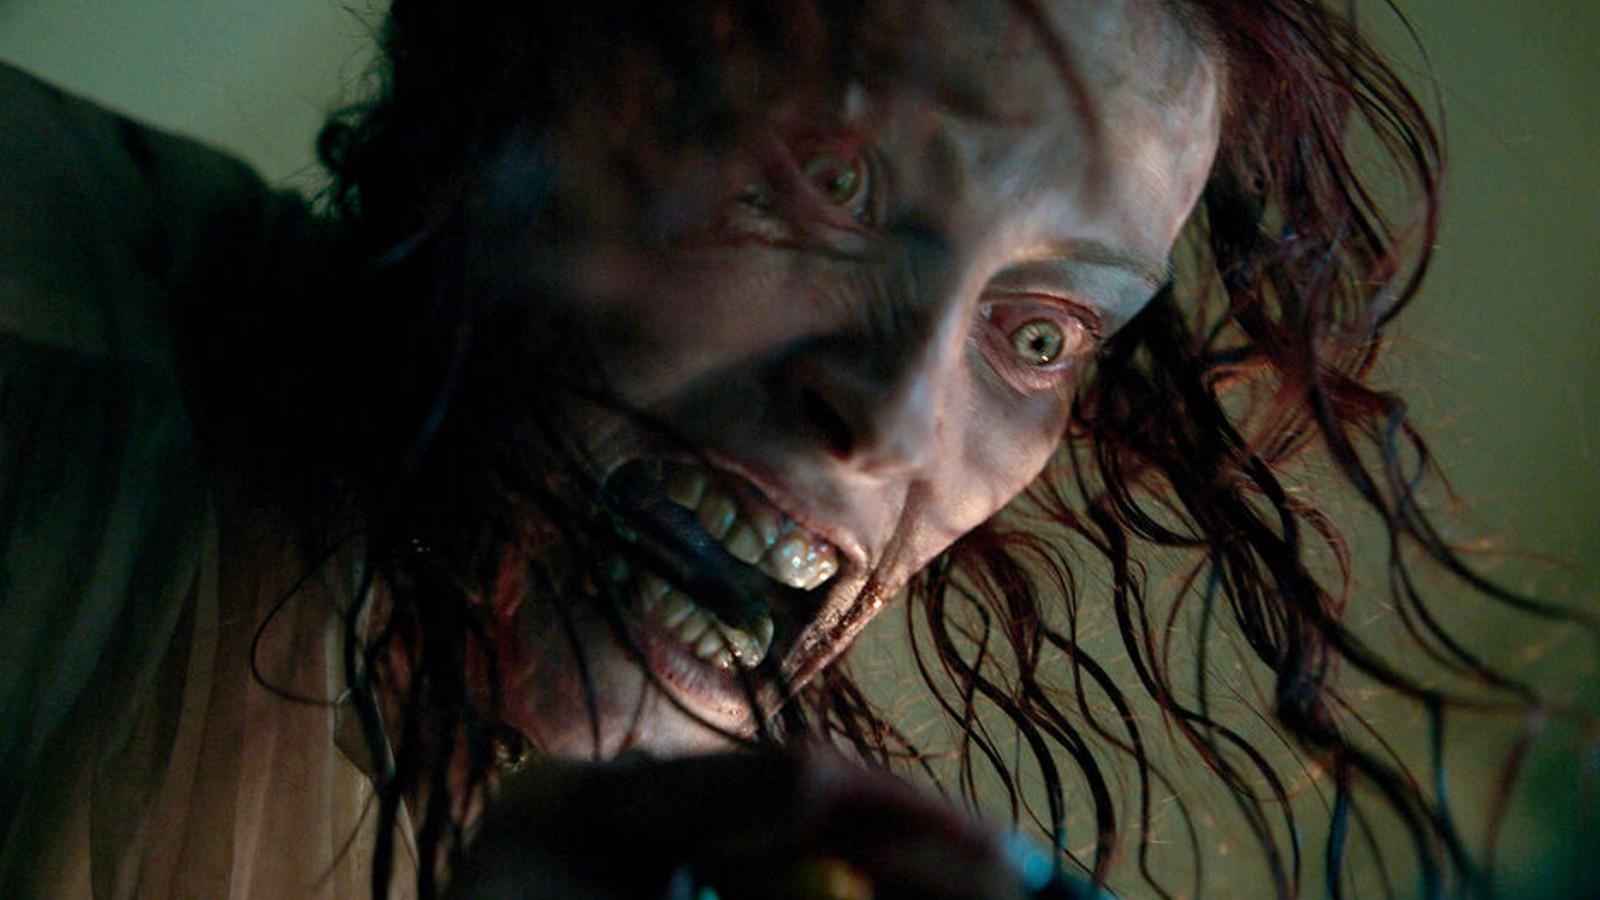 Here's Where To Watch 'Evil Dead Rise' Free Online: Is Evil Dead Rise  (2023) Streaming On HBO Max Or Netflix